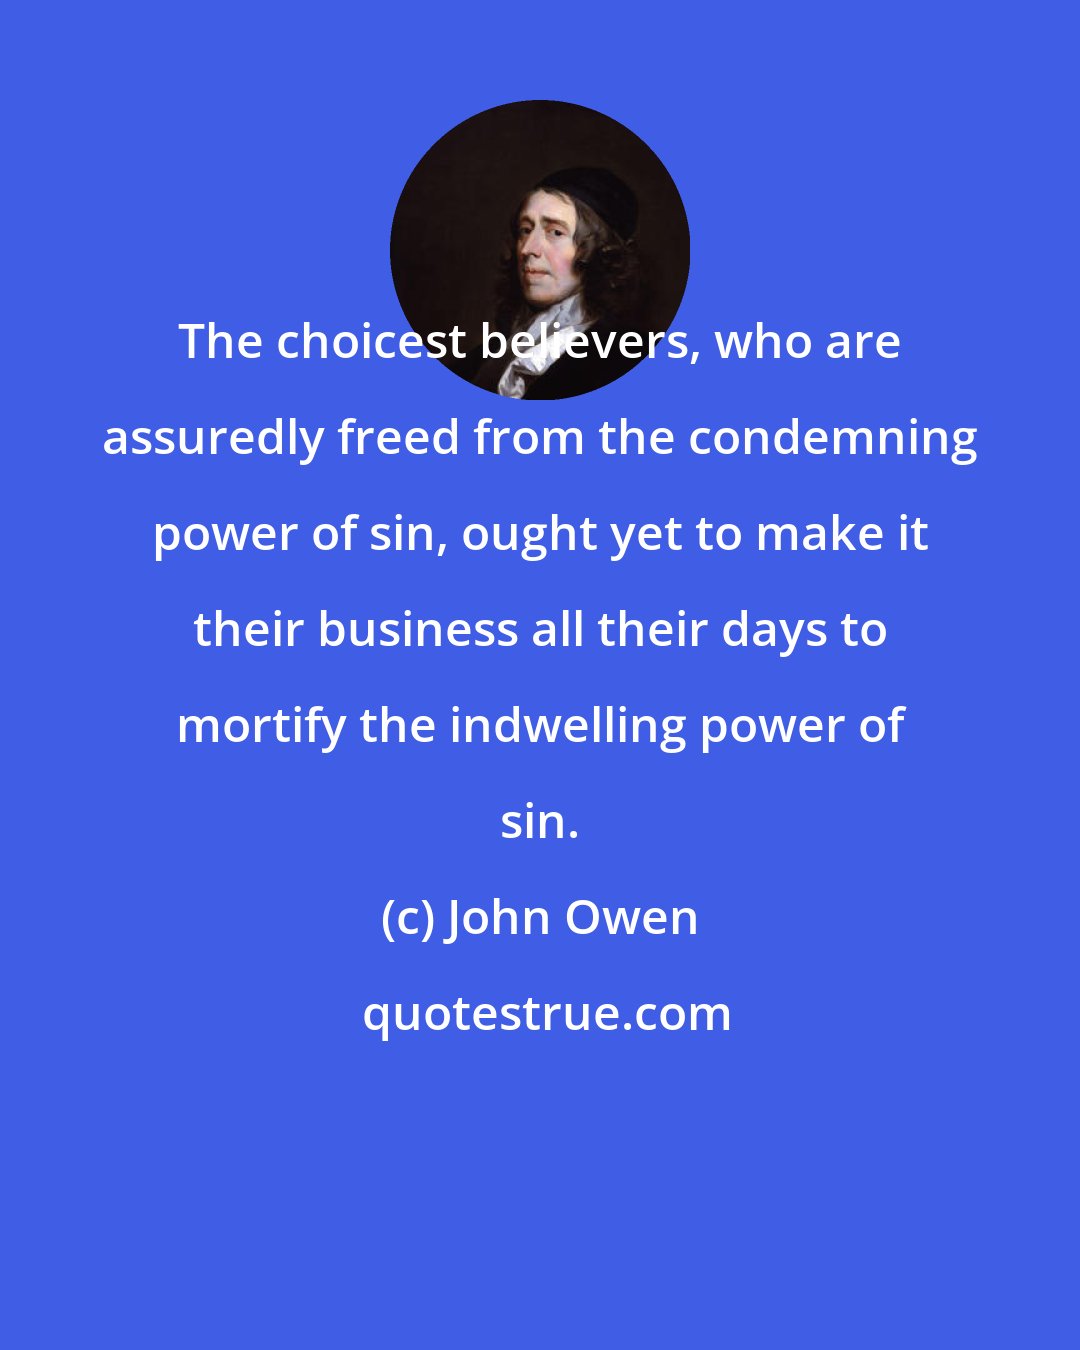 John Owen: The choicest believers, who are assuredly freed from the condemning power of sin, ought yet to make it their business all their days to mortify the indwelling power of sin.